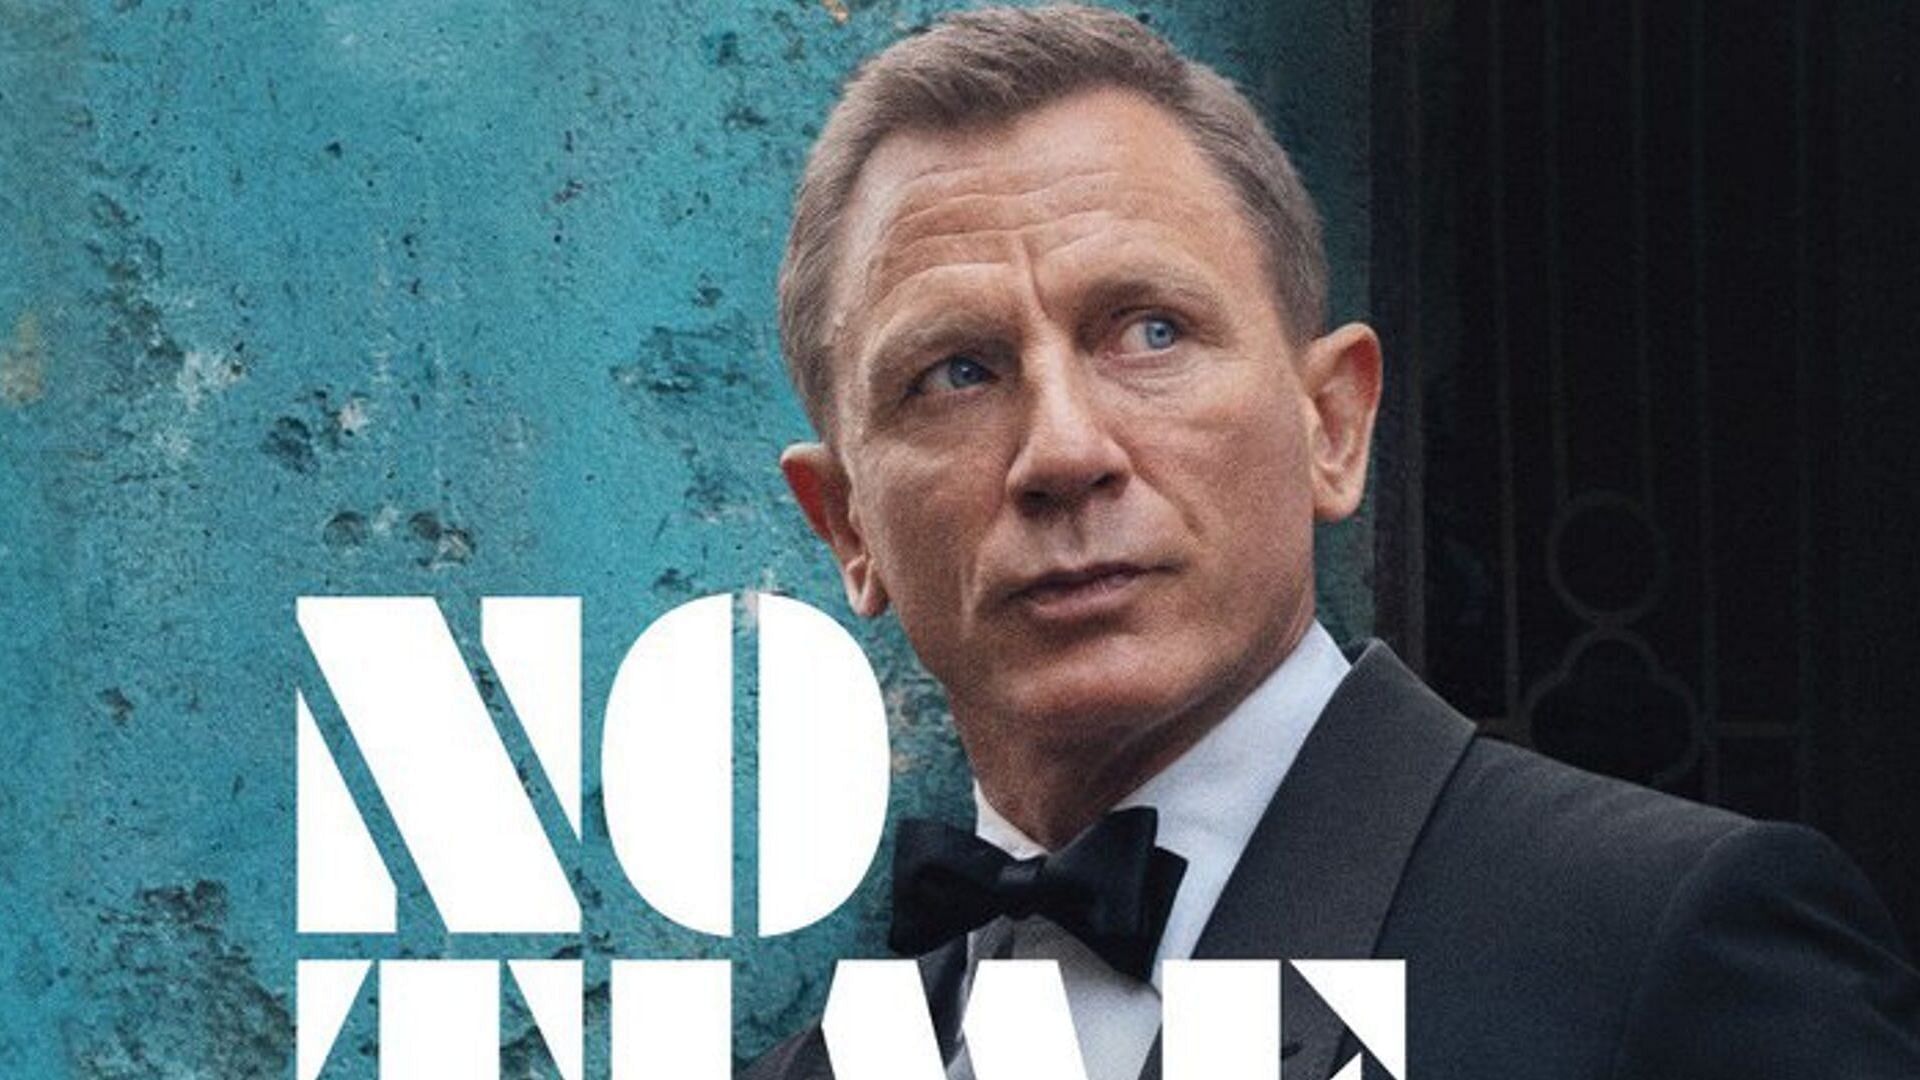 Daniel Craig as James Bond in the poster for <i>No Time to Die.</i>